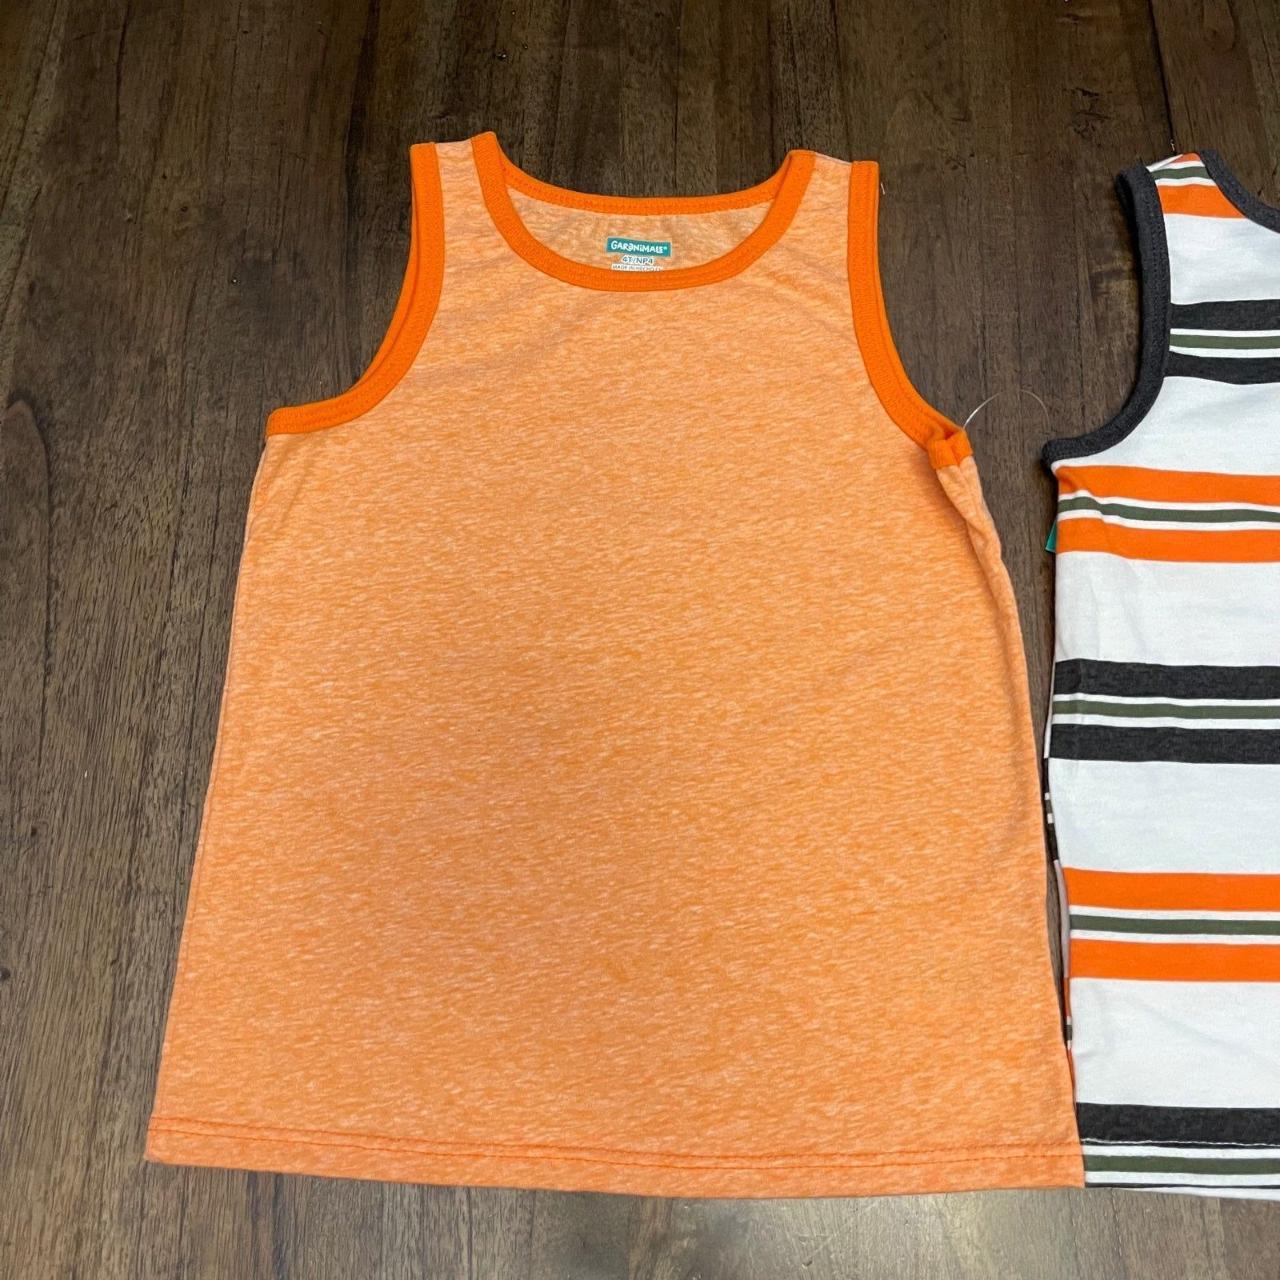 Product Image 3 - 2 Tanks SIZE 4T

New with